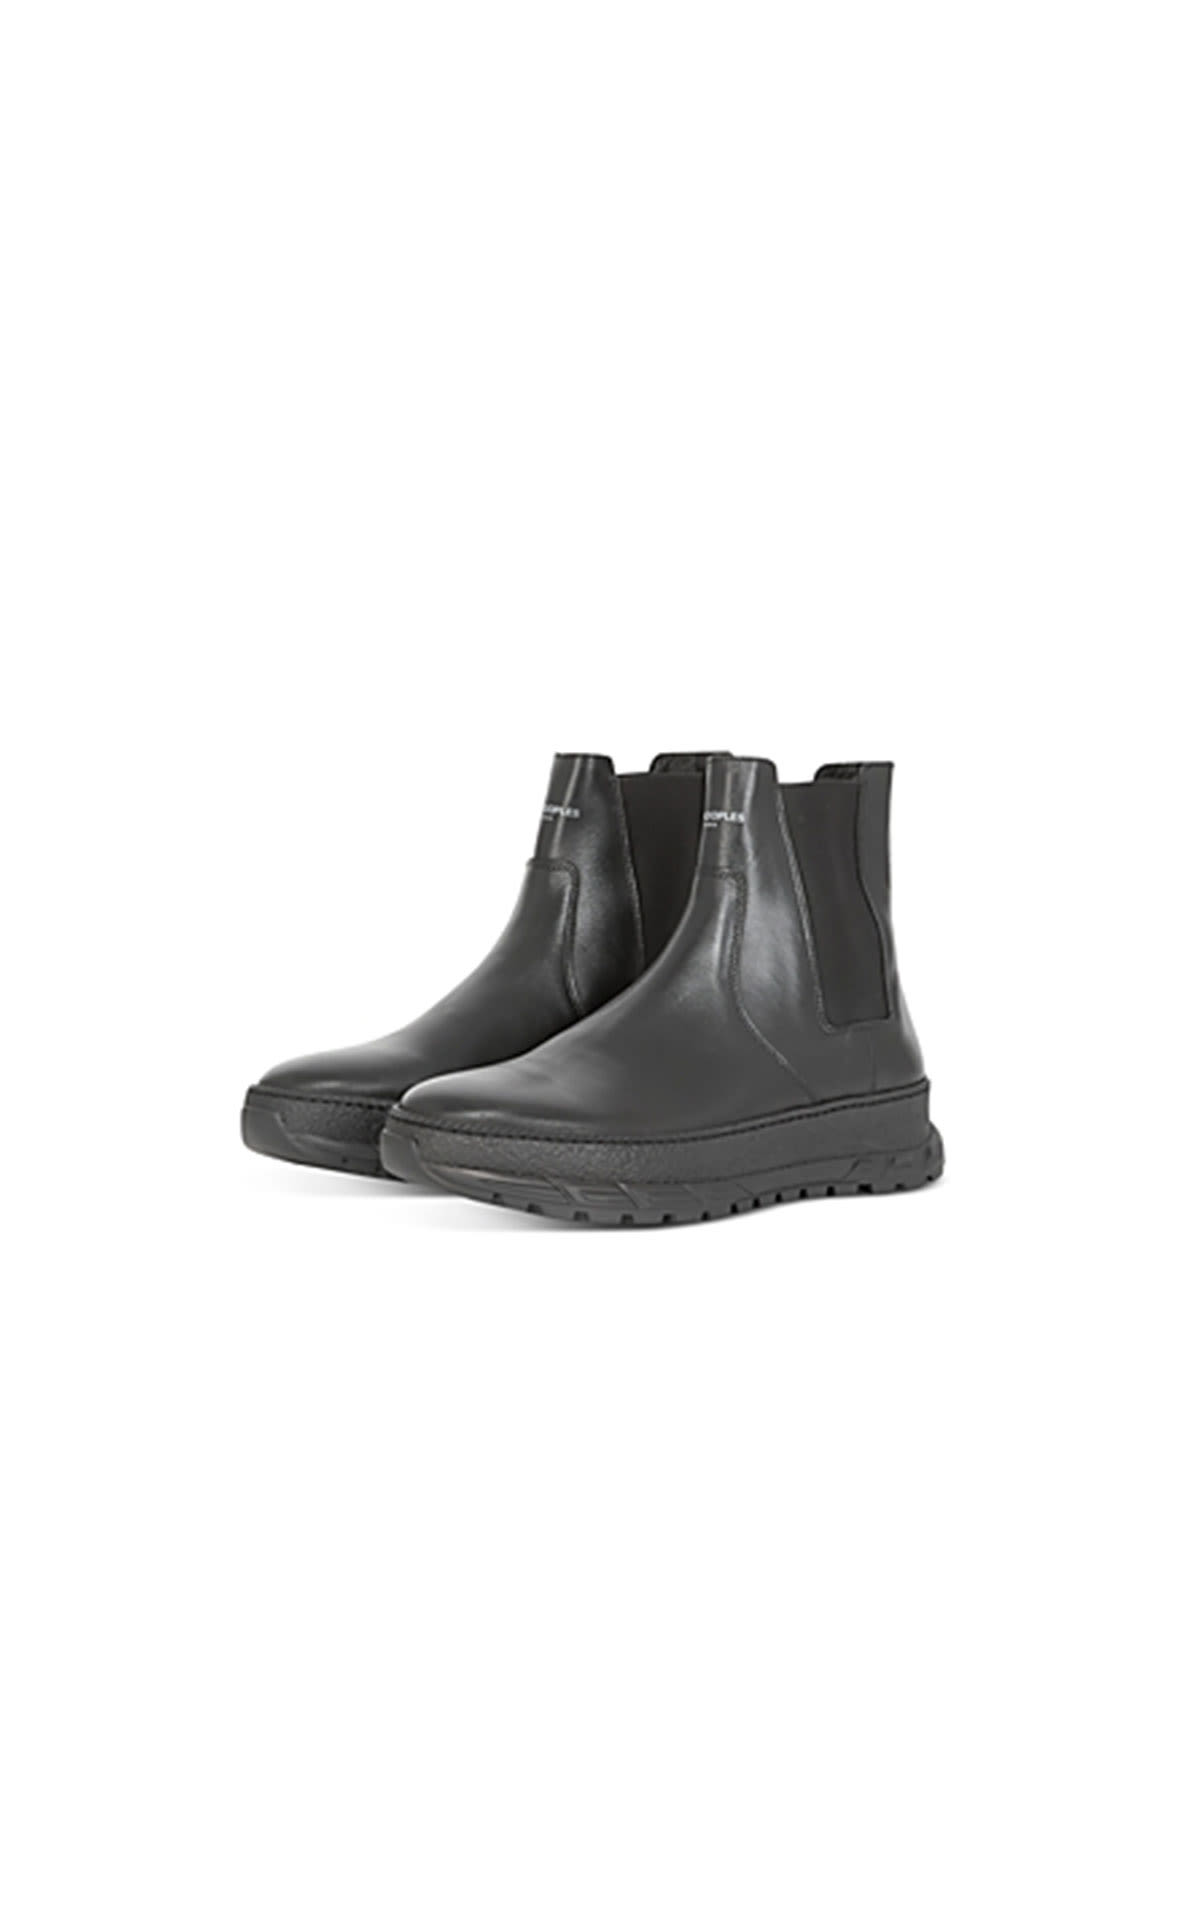 The Kooples Black leather ankle boots from Bicester Village